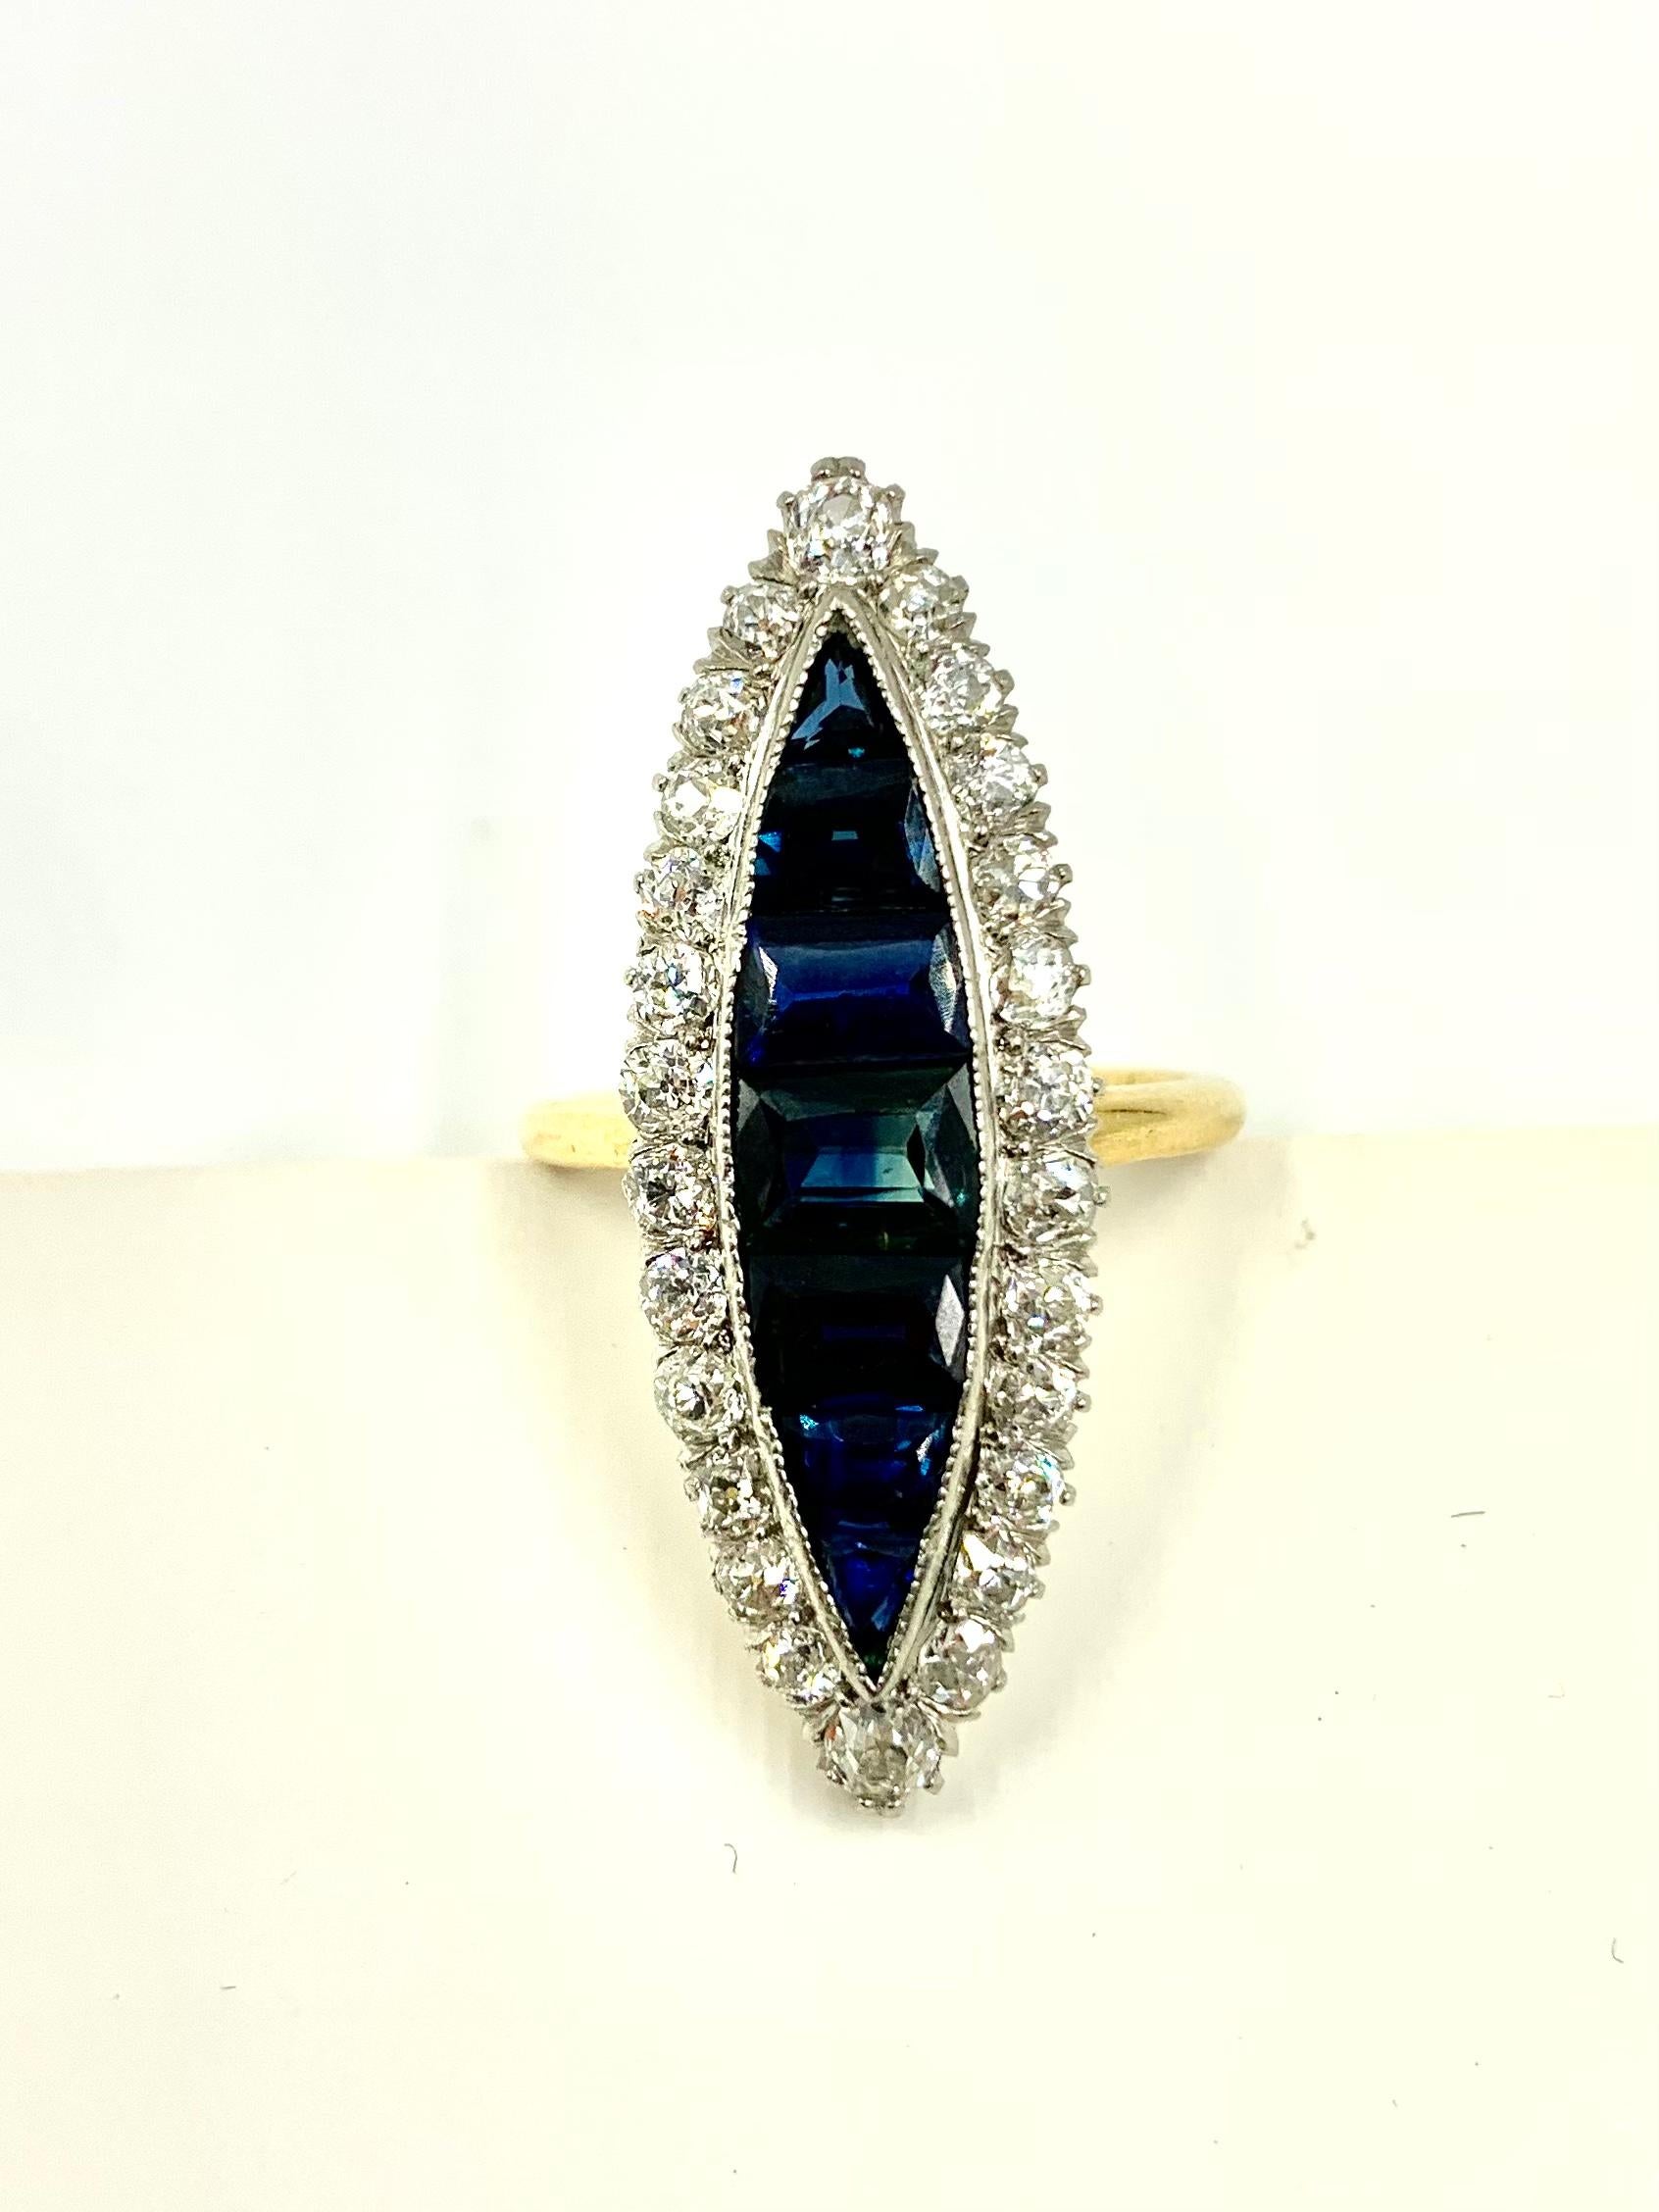 Large Antique Edwardian Diamond, Invisibly Set Sapphire 18k Gold Navette Ring For Sale 3